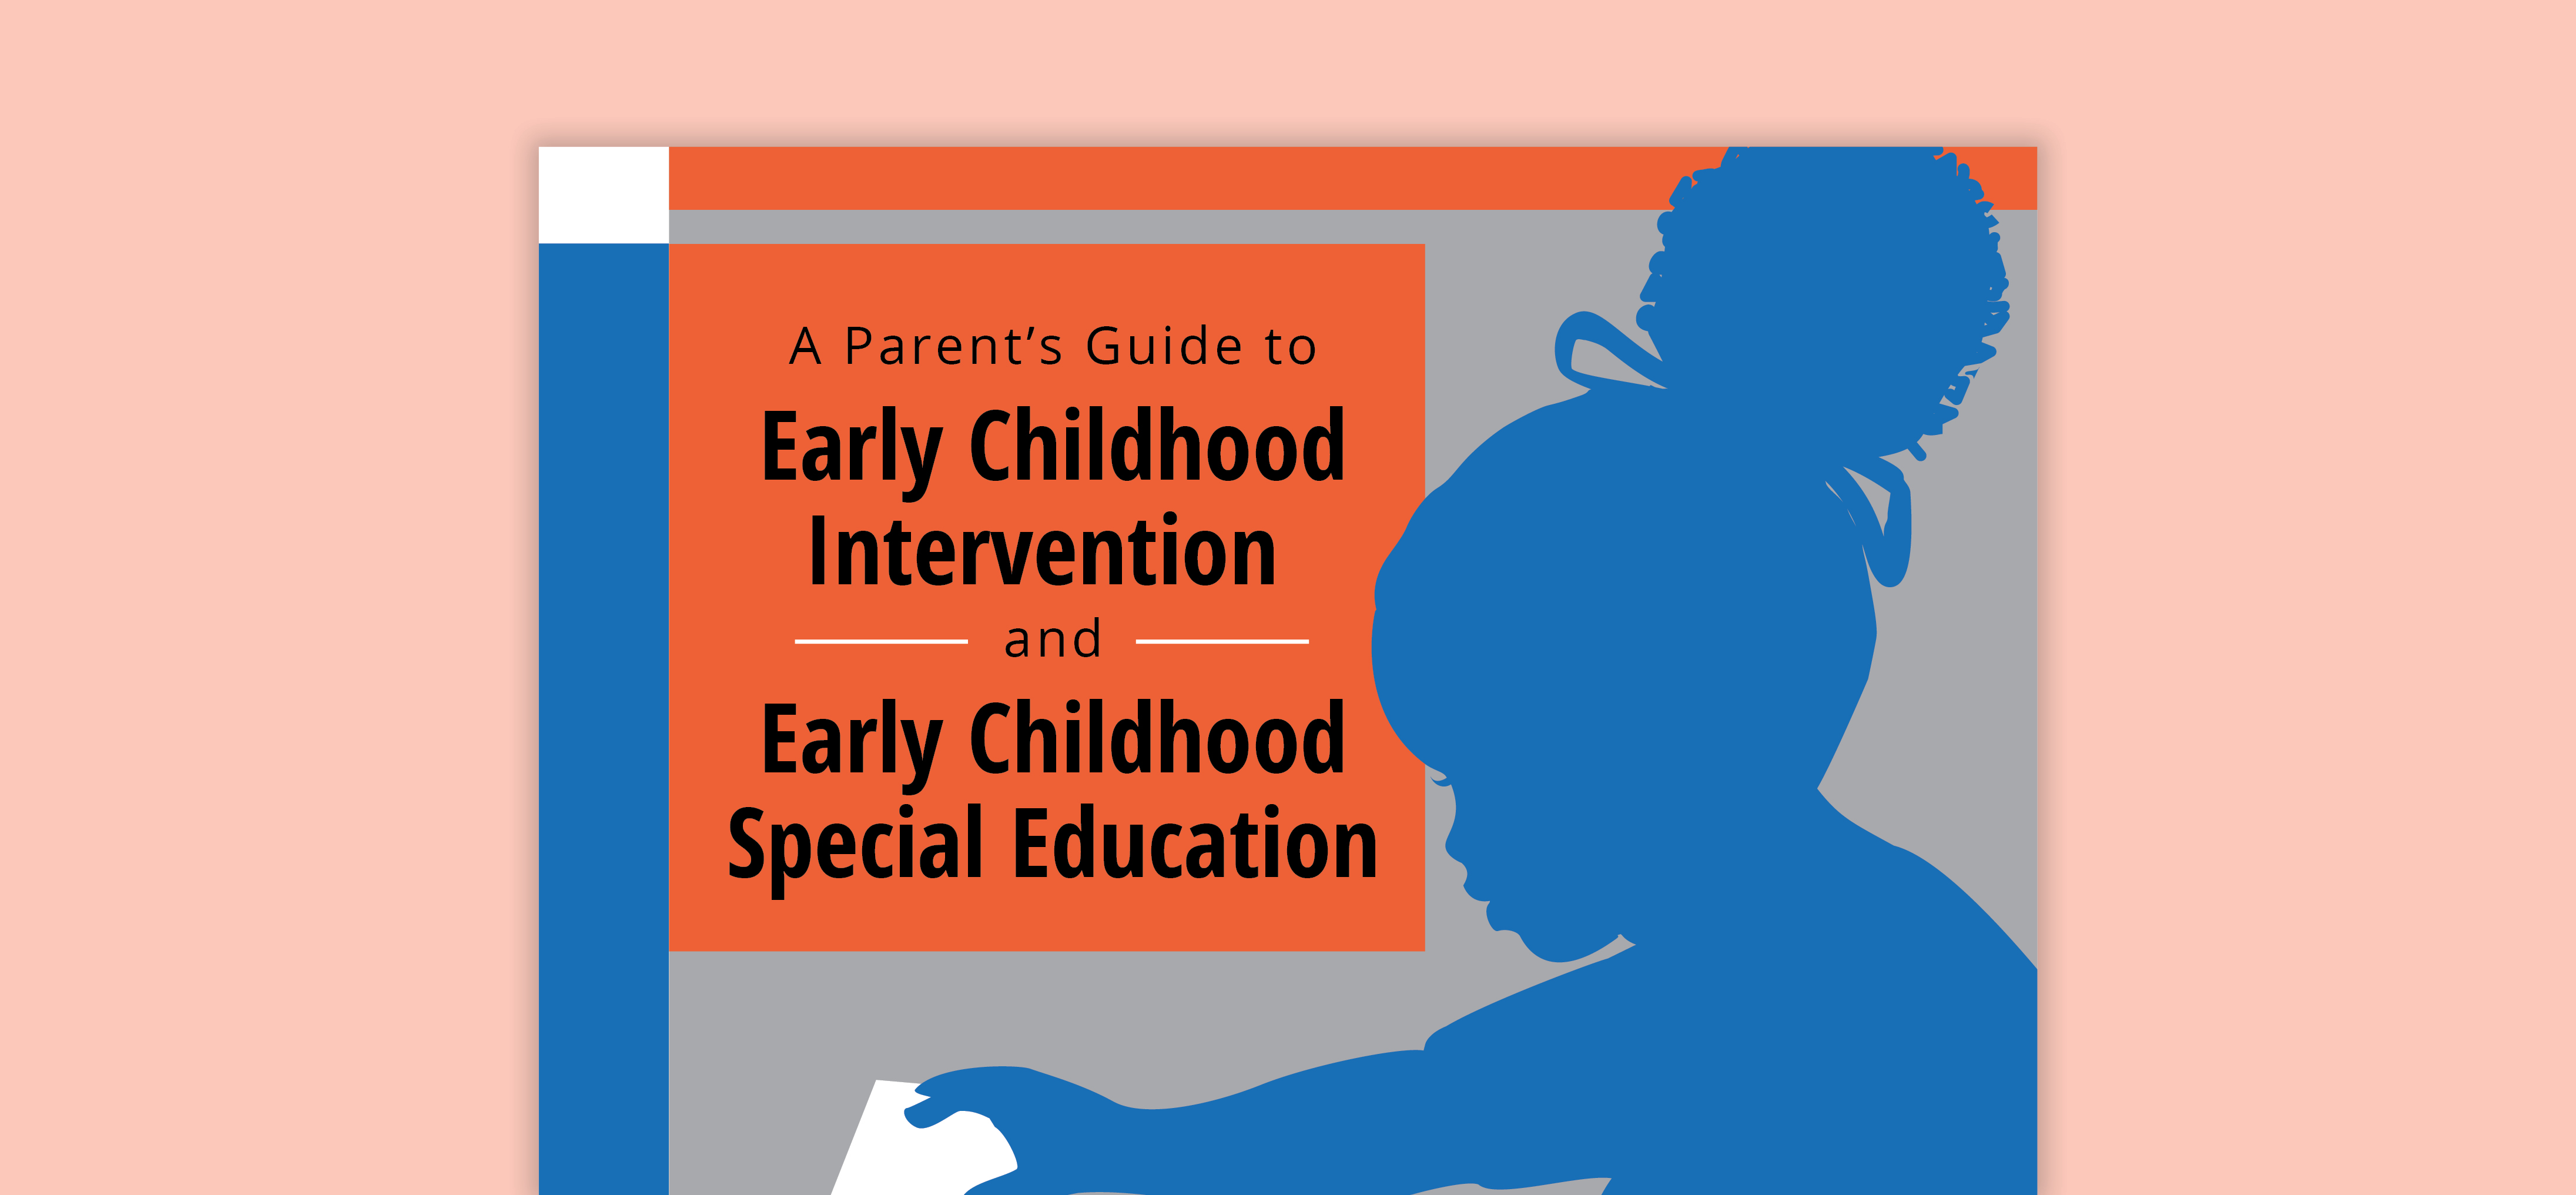 A Parent's Guide to Early Childhood Intervention and Early